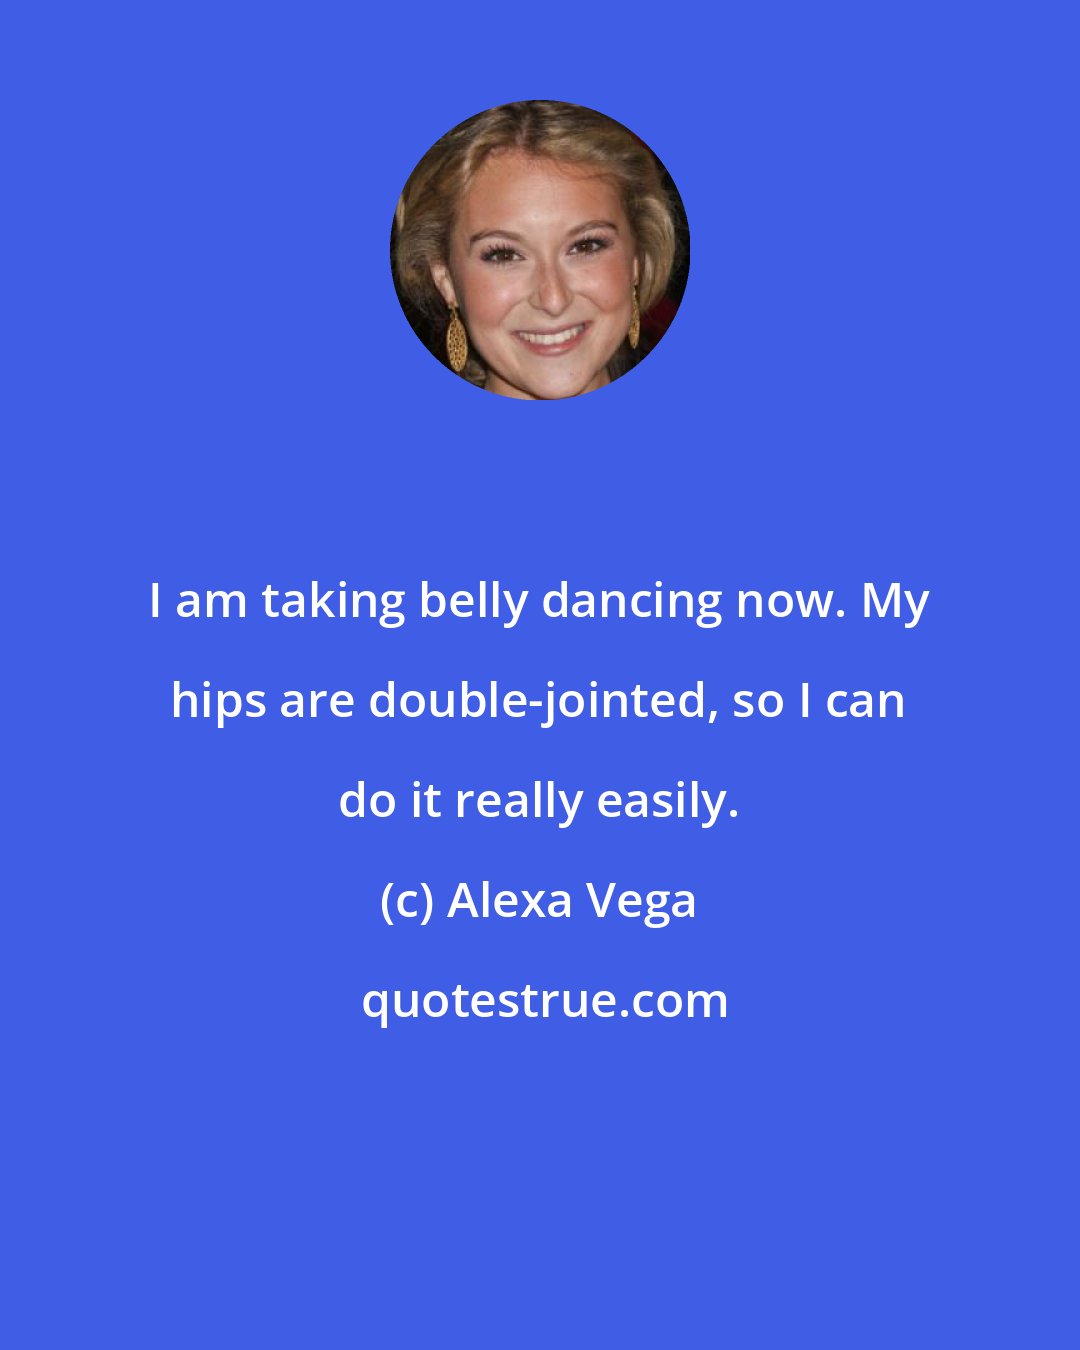 Alexa Vega: I am taking belly dancing now. My hips are double-jointed, so I can do it really easily.